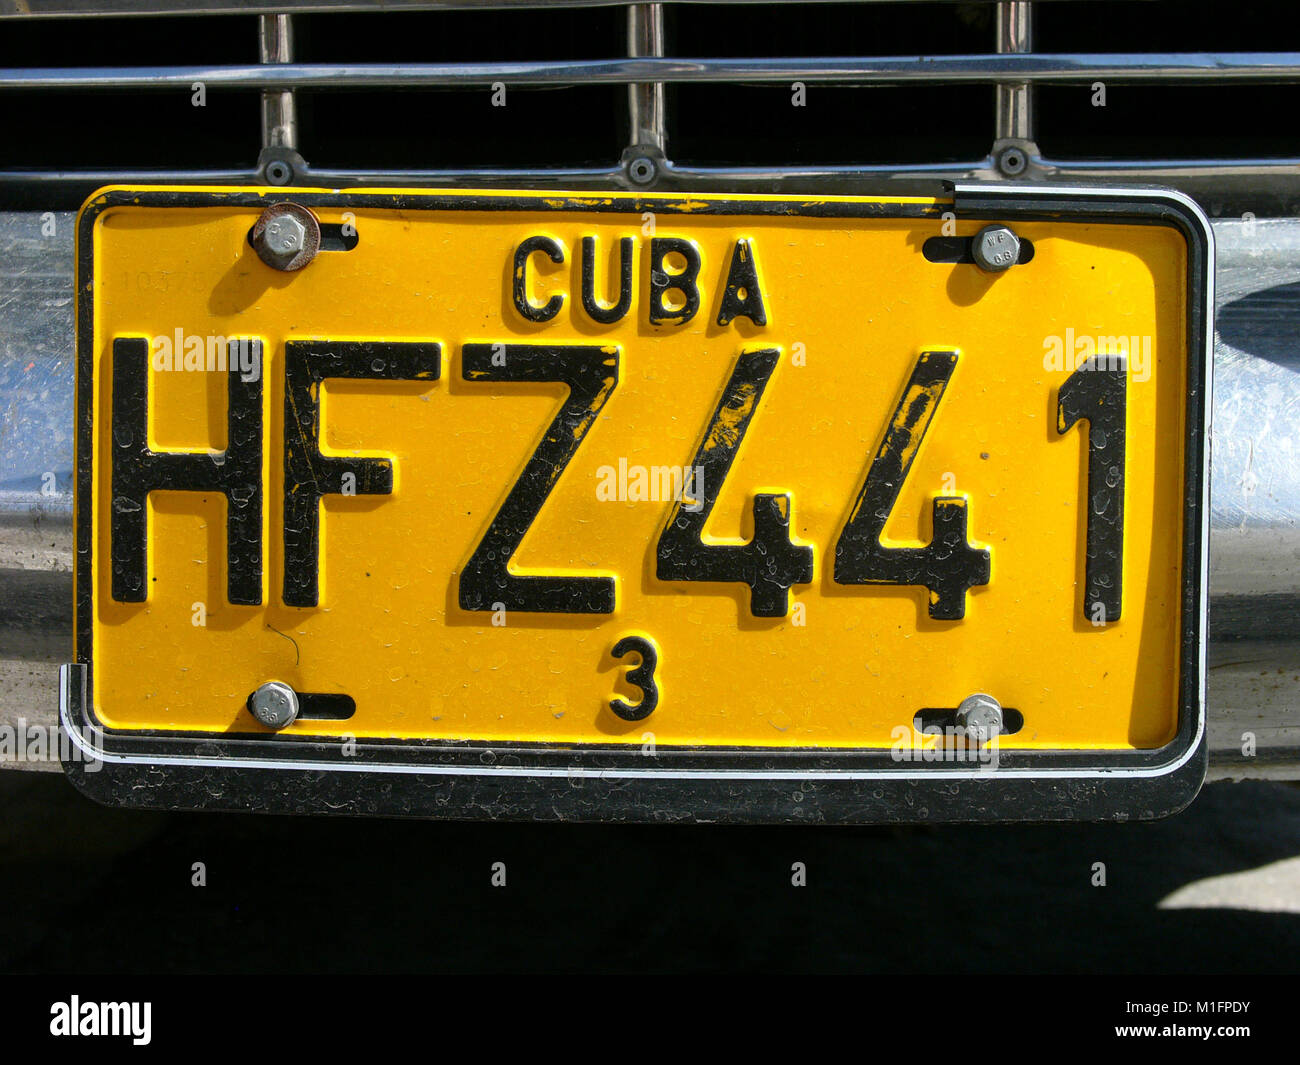 Mar 28, 2006 - Havana, CUBA - One of many Cuban Maquinas, aka Yank tanks or pre 1960 American Classic cars with Cuban License plate, in the streets of Havana. One in eight cars in Cuba today is a pre-1960s American brand Ford, Chevrolet, Cadillac, Chrysler, Packard and other classic models. The Republic of Cuba is located in the northern Caribbean and south of the United States. The first European to visit Cuba was explorer Christopher Columbus in 1492. Centuries of colonial rule and revolutions followed. Batista was deposed by Fidel Castro and Che guevara in 1953. After the revolution trade w Stock Photo